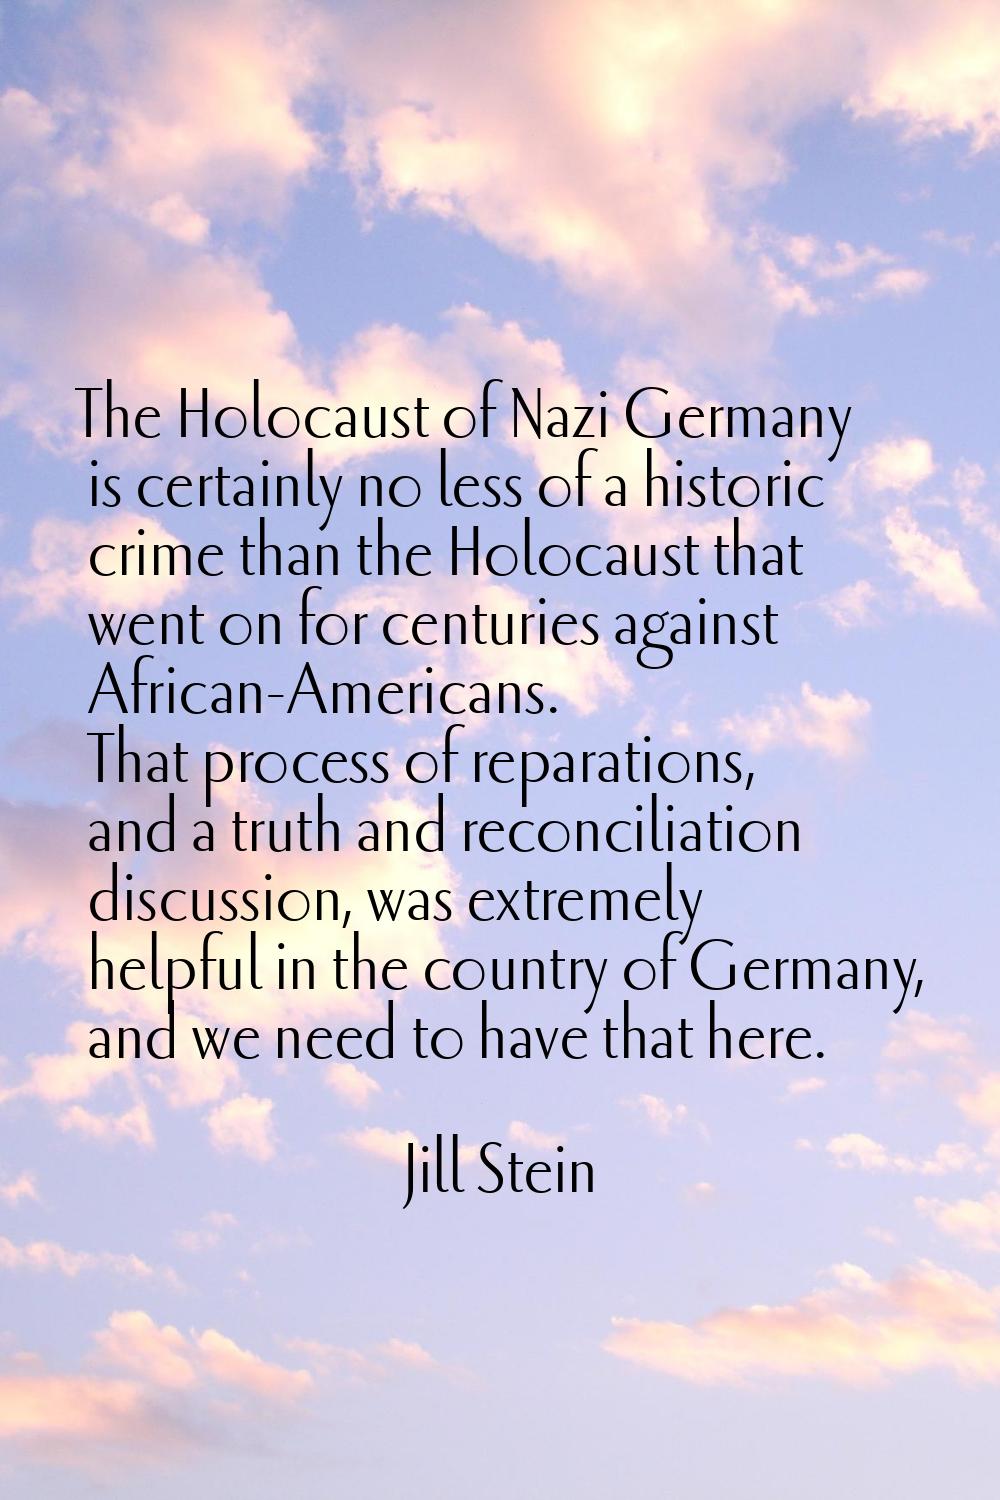 The Holocaust of Nazi Germany is certainly no less of a historic crime than the Holocaust that went